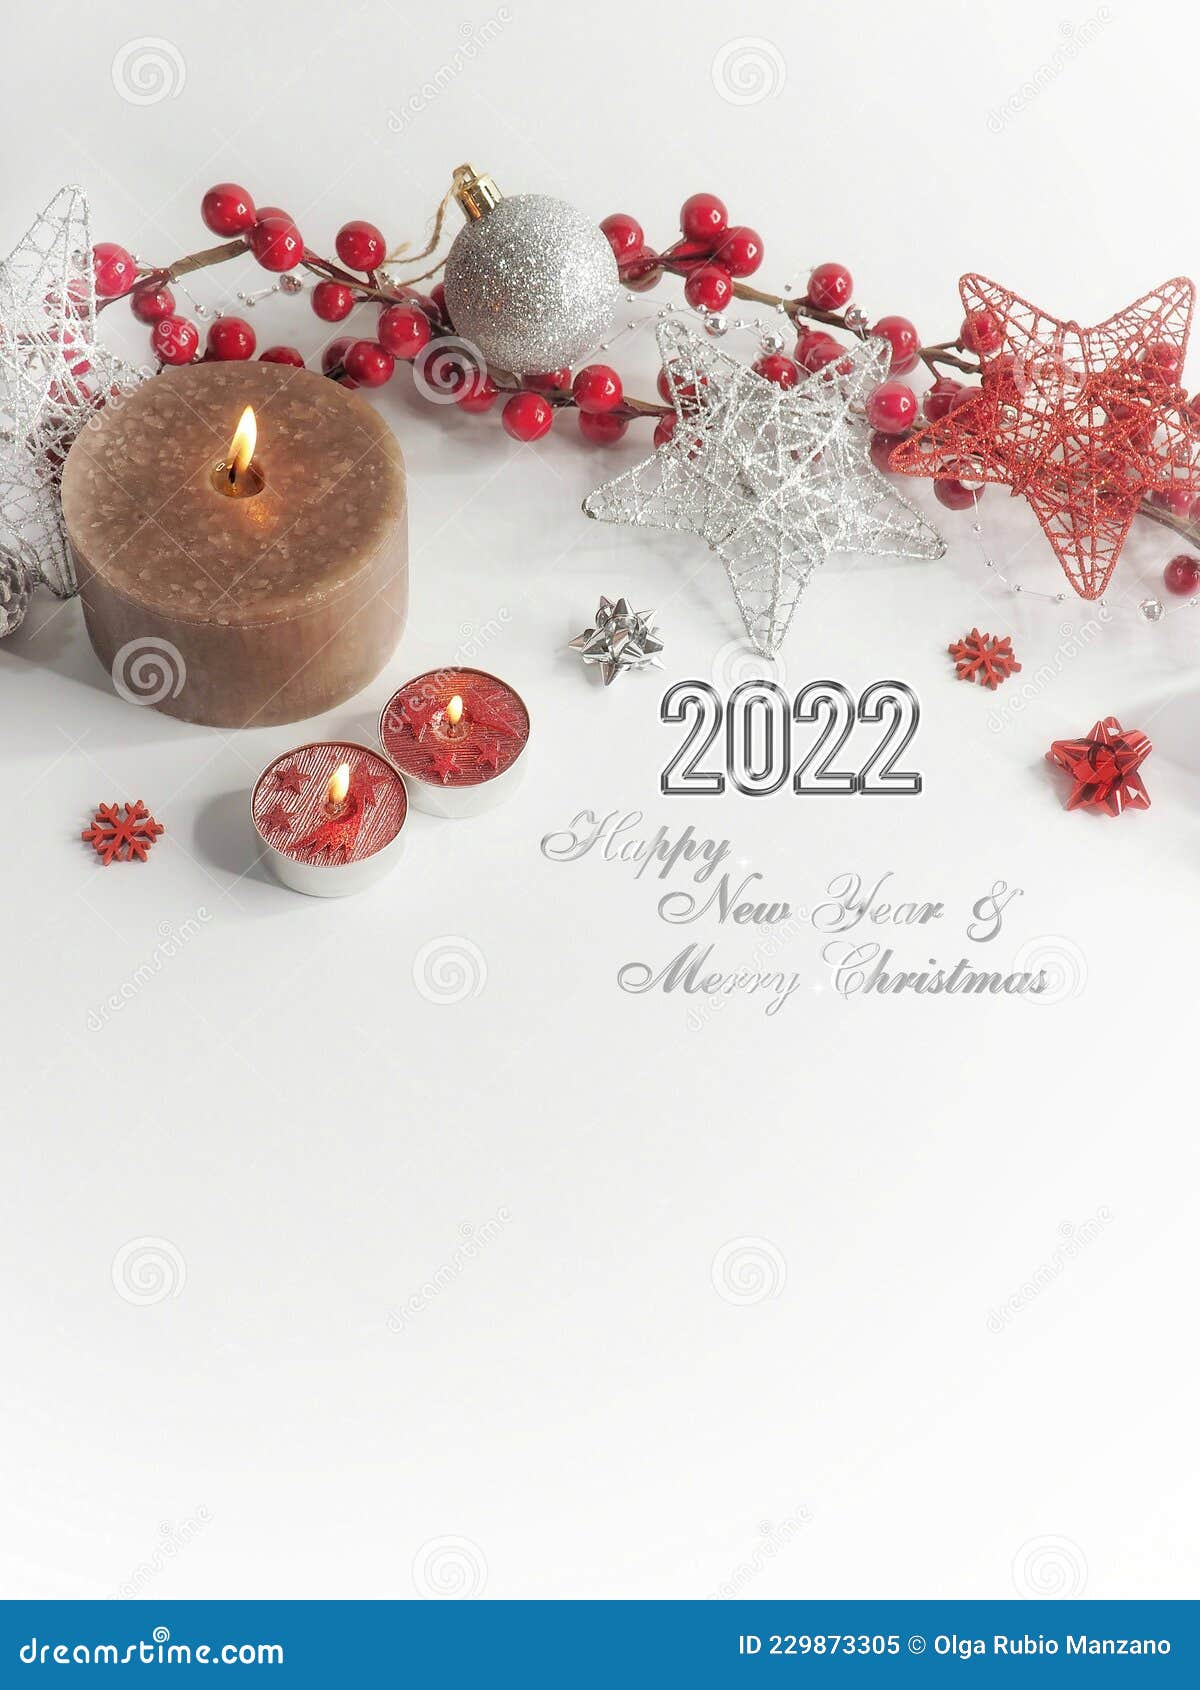 Merry Christmas and Happy New Year 2022 Greeting Card on White Background  Stock Image - Image of design, celebrate: 229873305